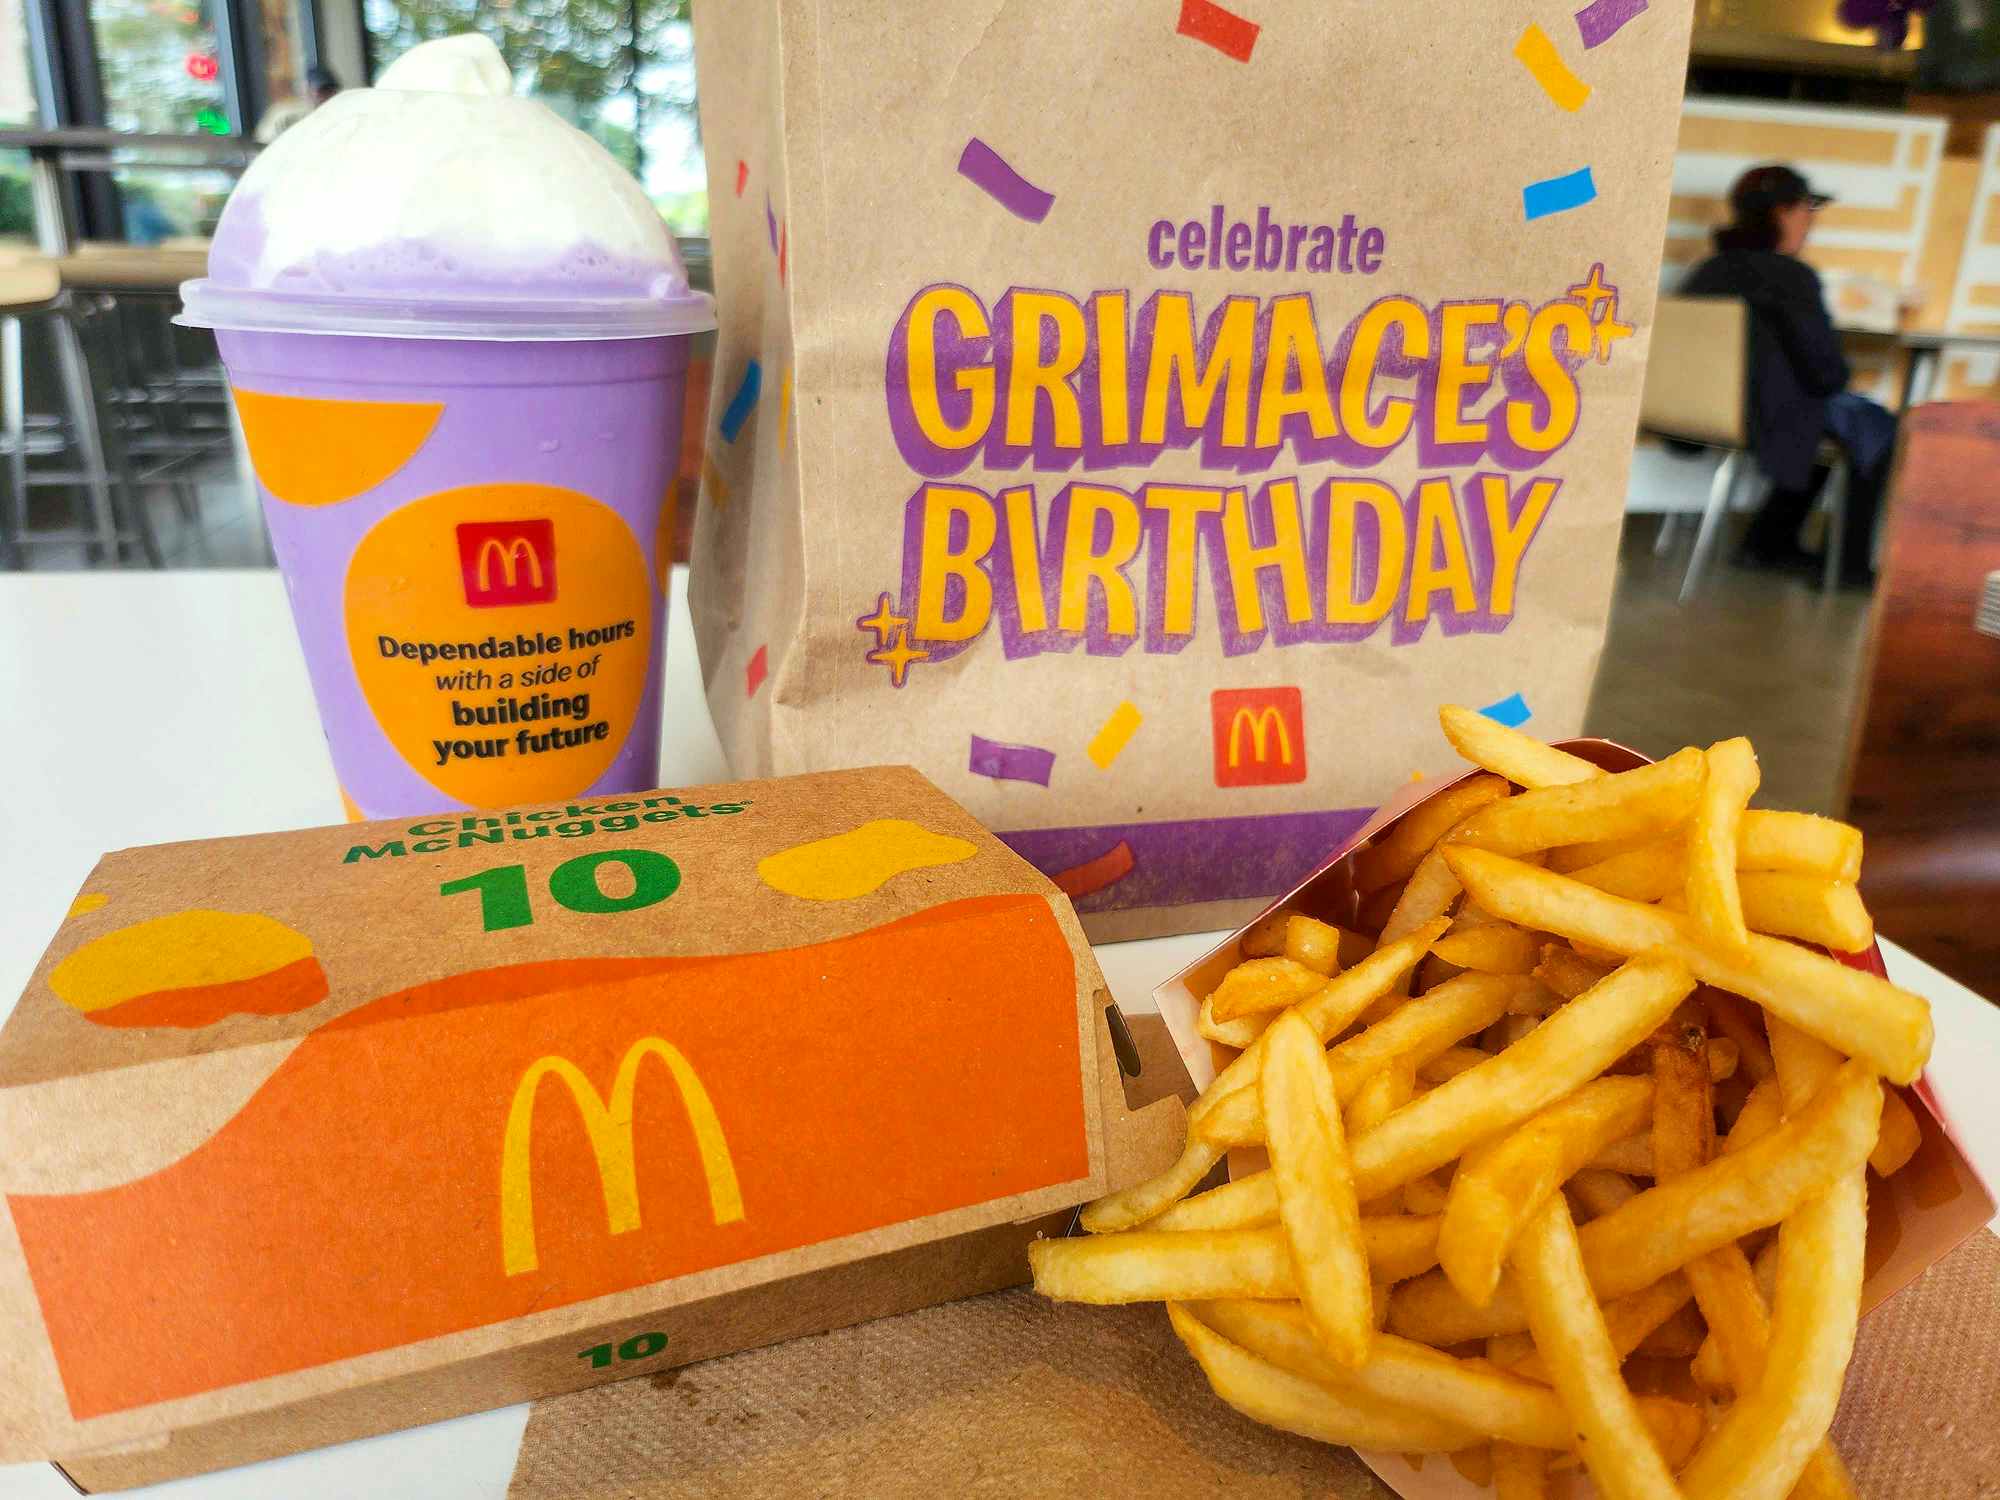 mcdonalds grimaces birthday meal shake, mcnuggets, fries, and bag on table